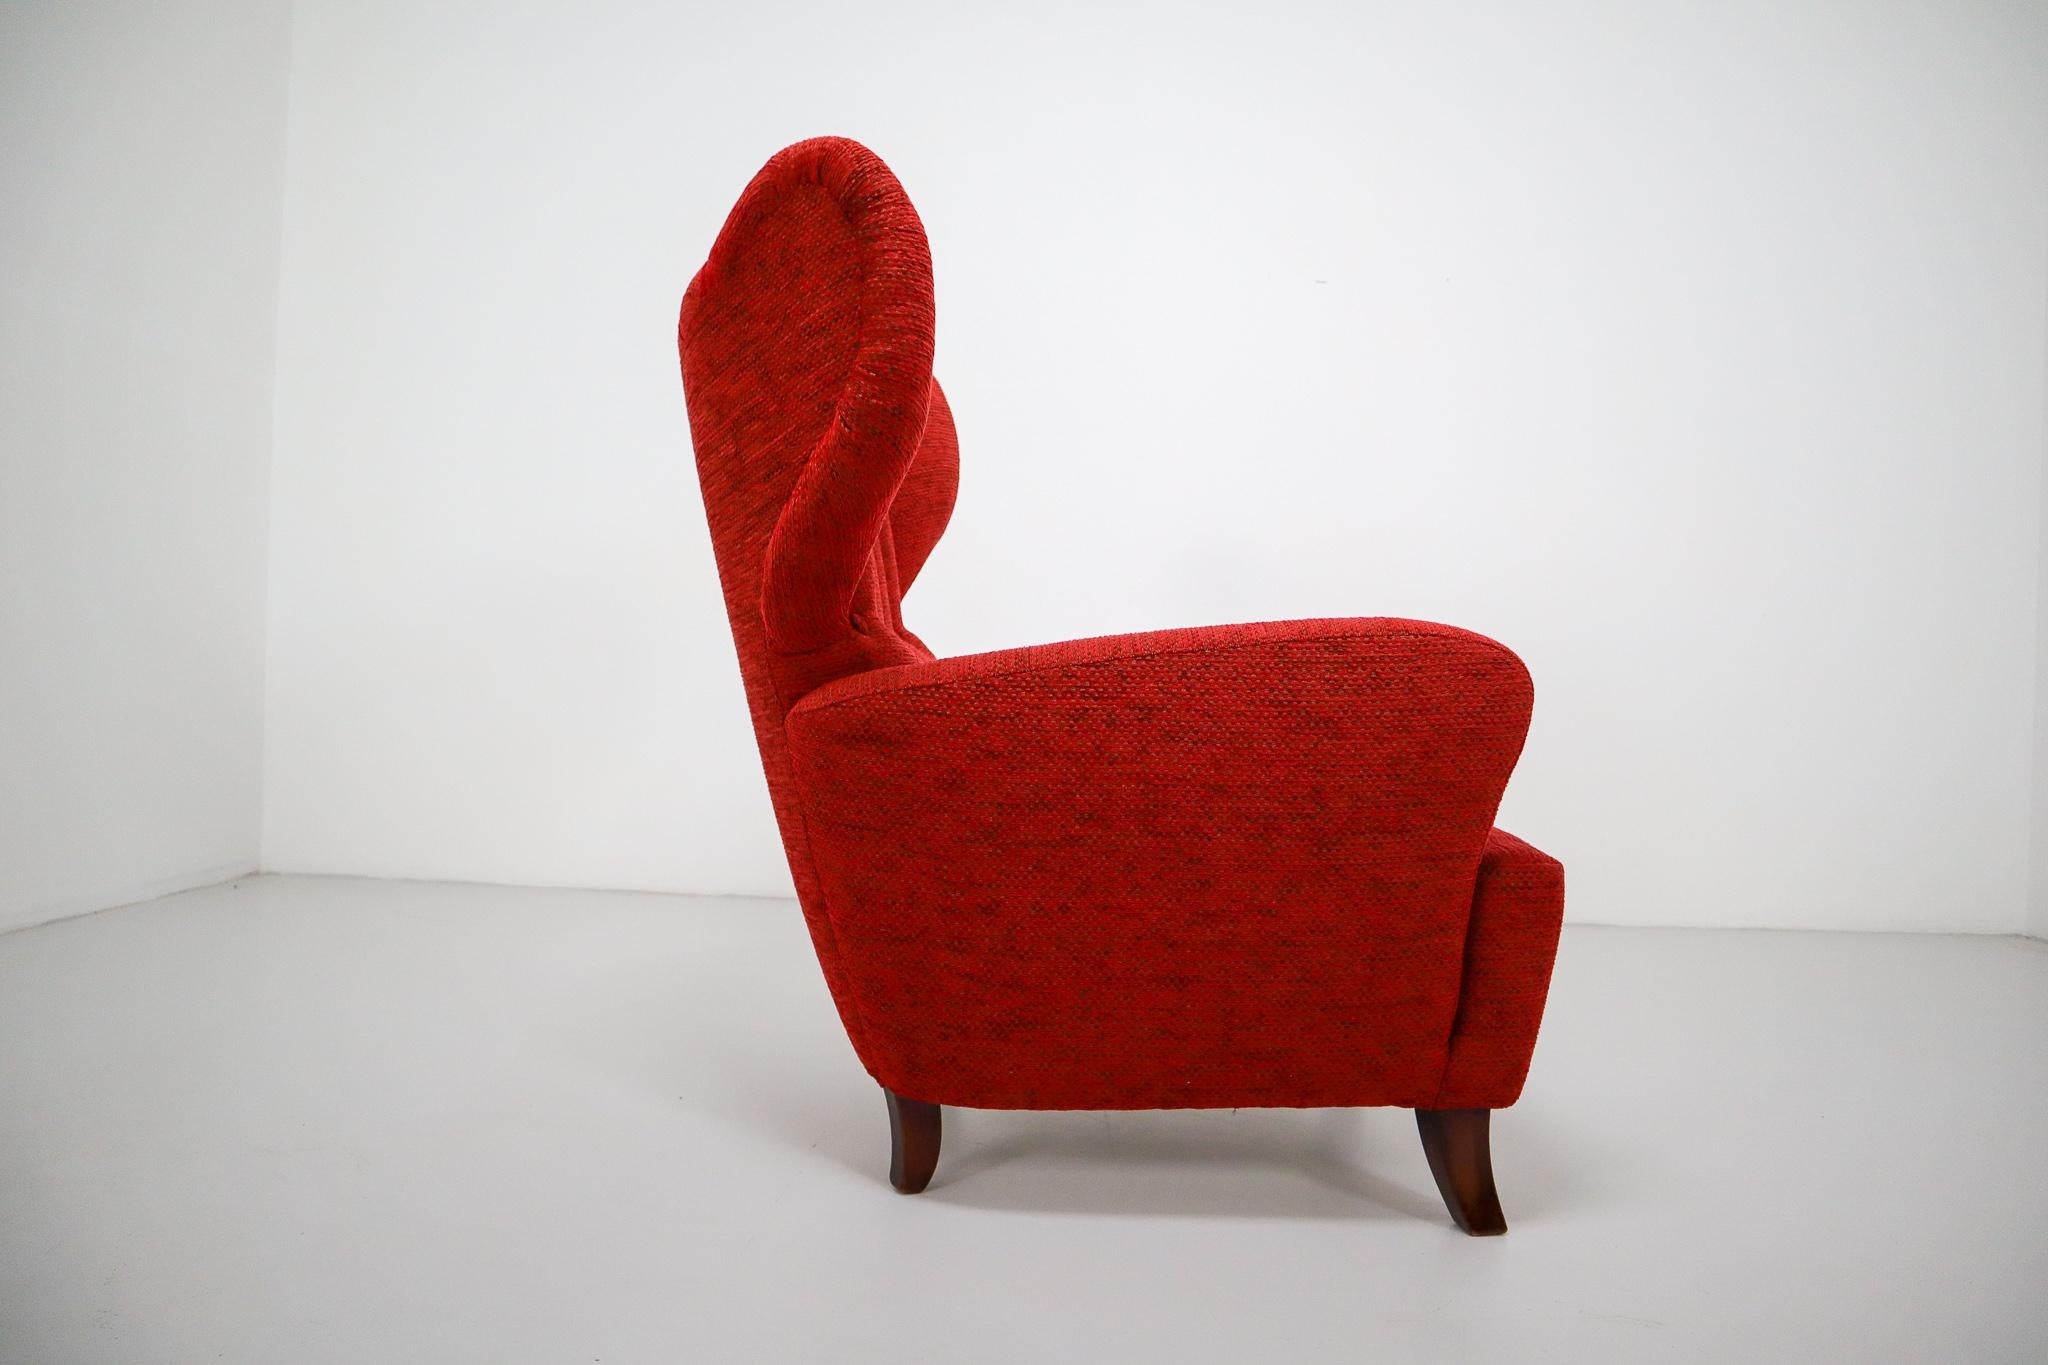 Fabric Mid-20th Century Red Reupholstered Wingback Chair, Austria, 1930s